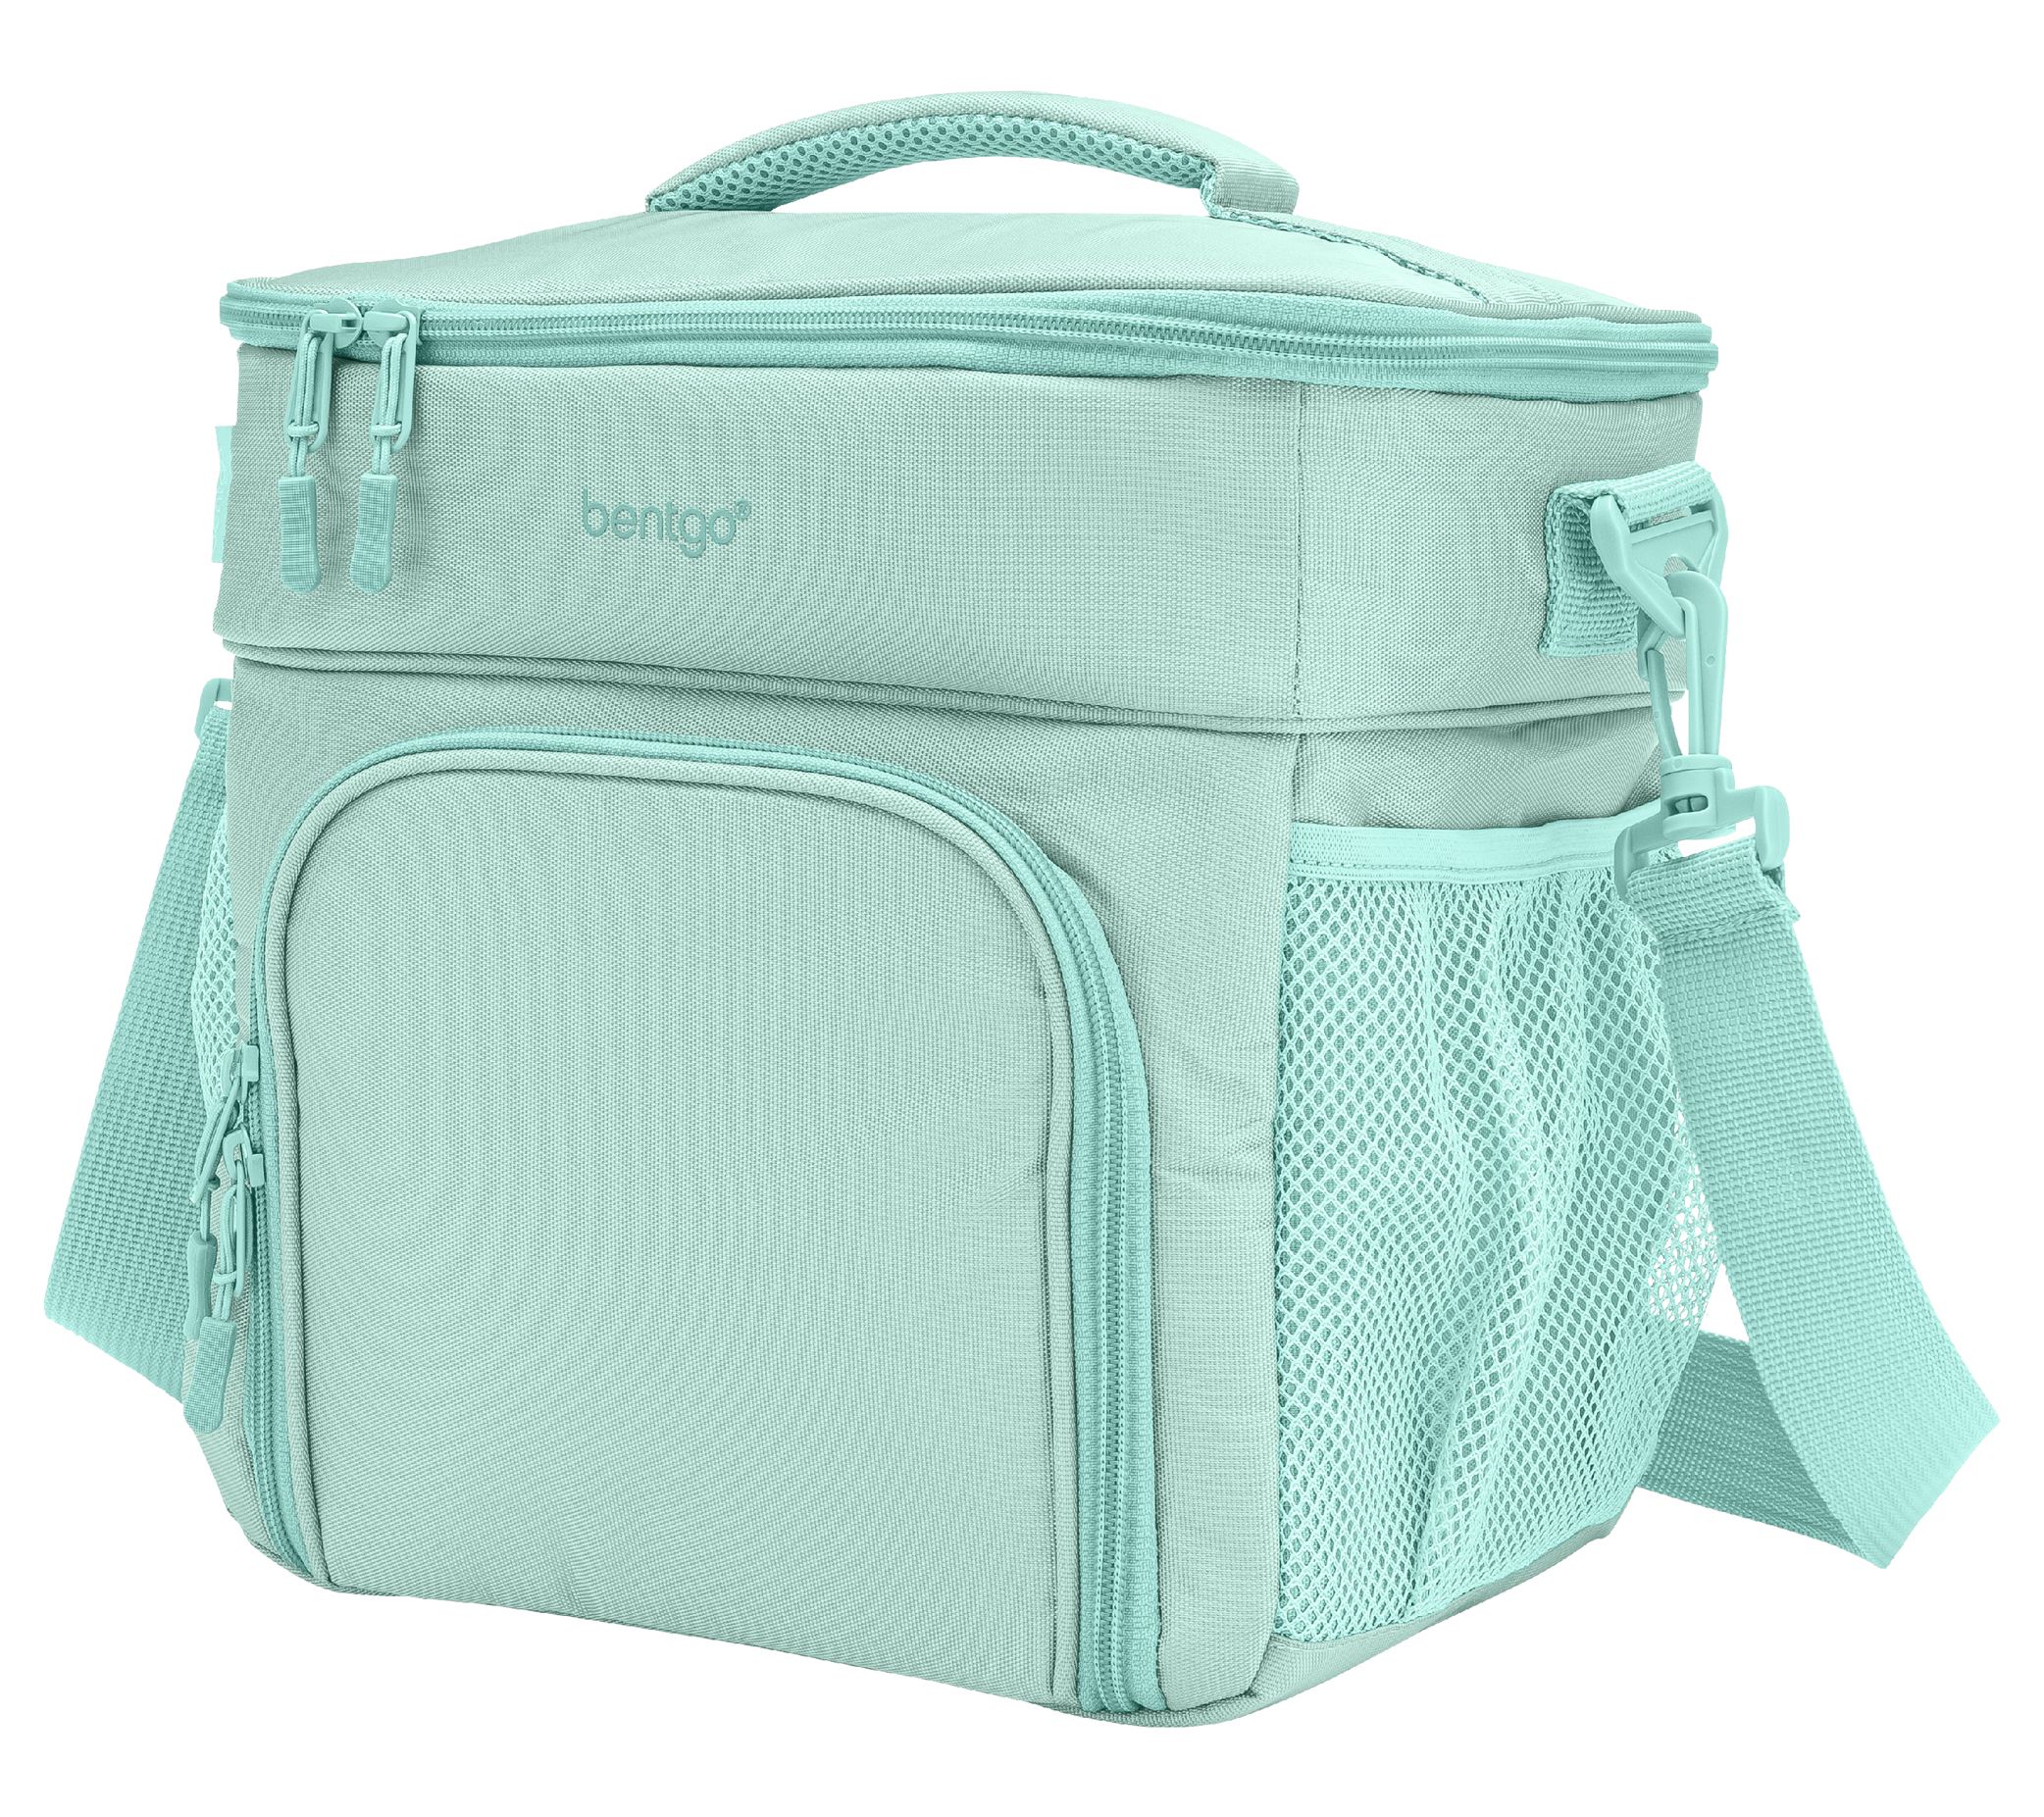 Bentgo Lunch Bag - 2-Way Zipper, Adjustable Strap, and Front